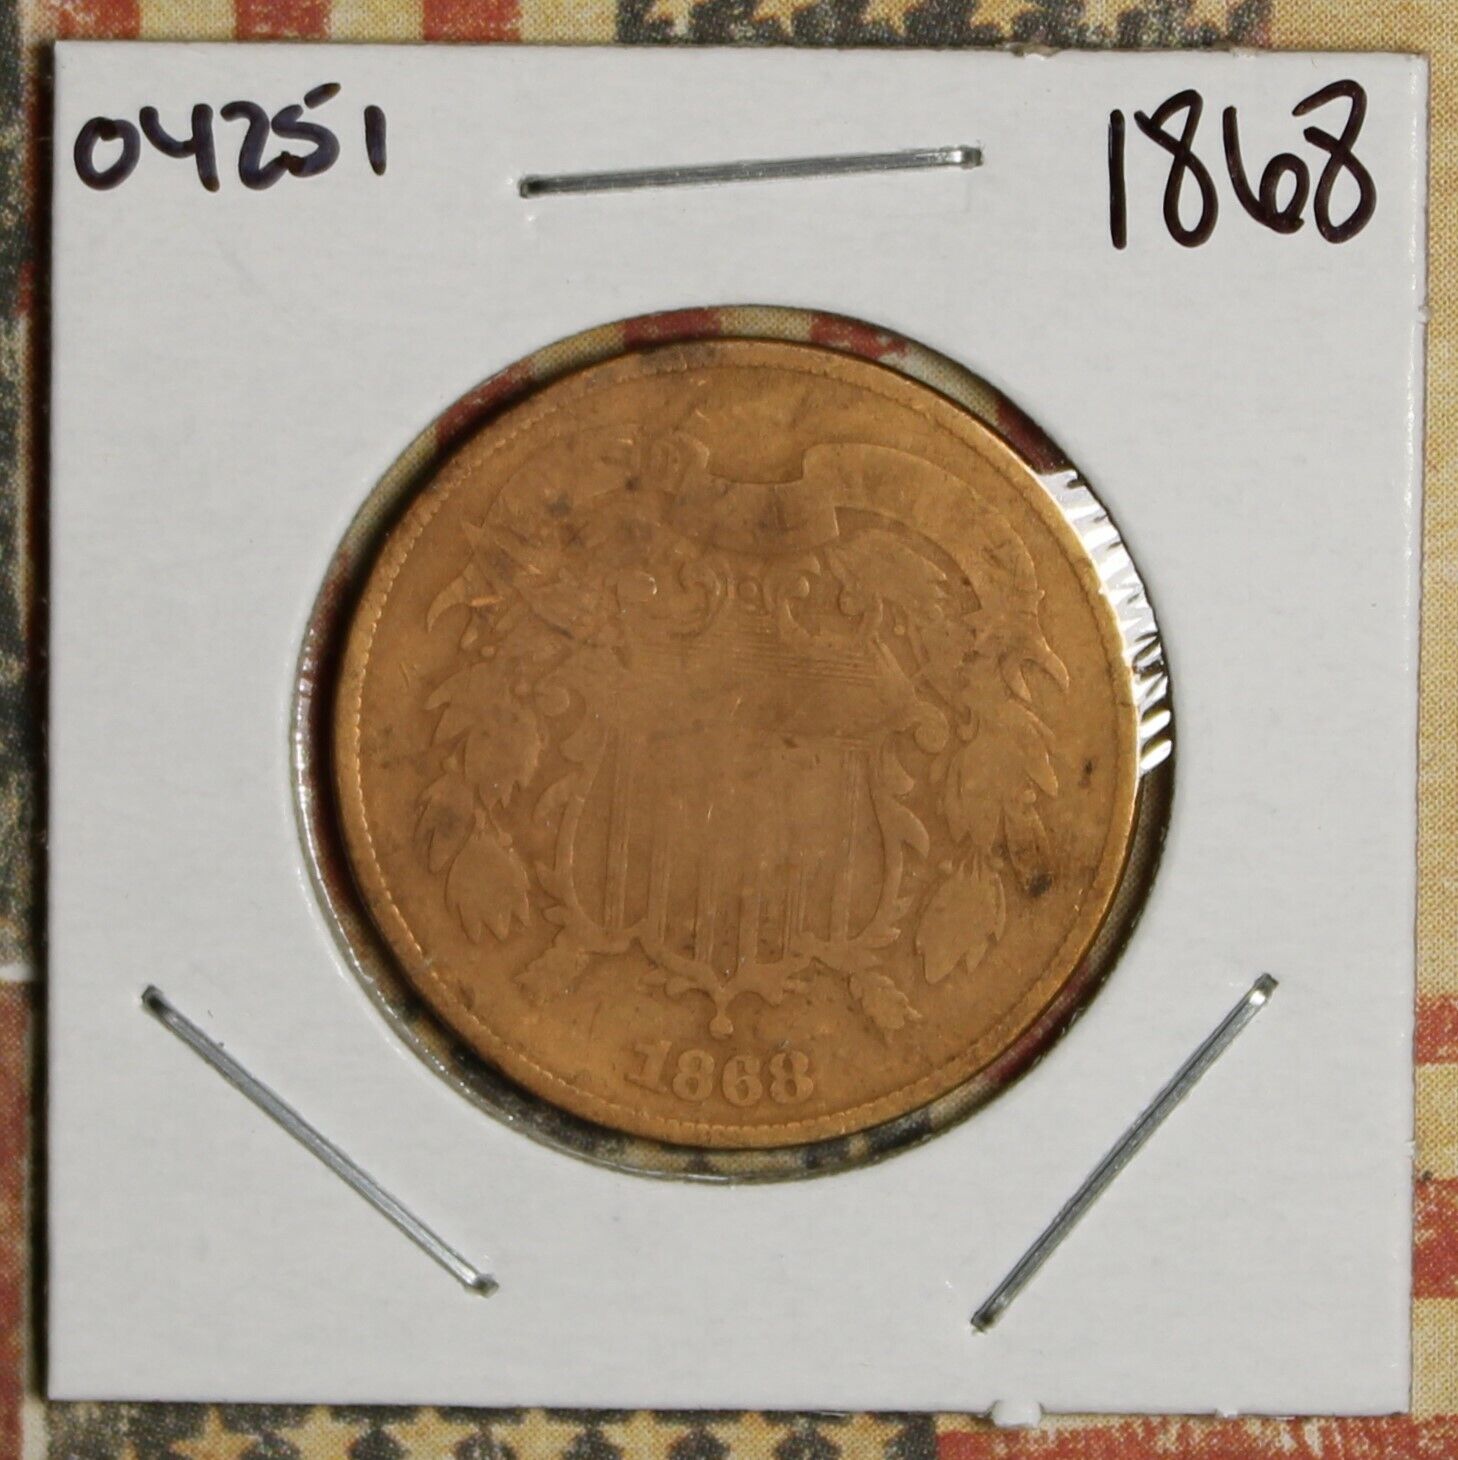 1868 2 CENT PIECE COPPER COLLECTOR COIN FREE SHIPPING